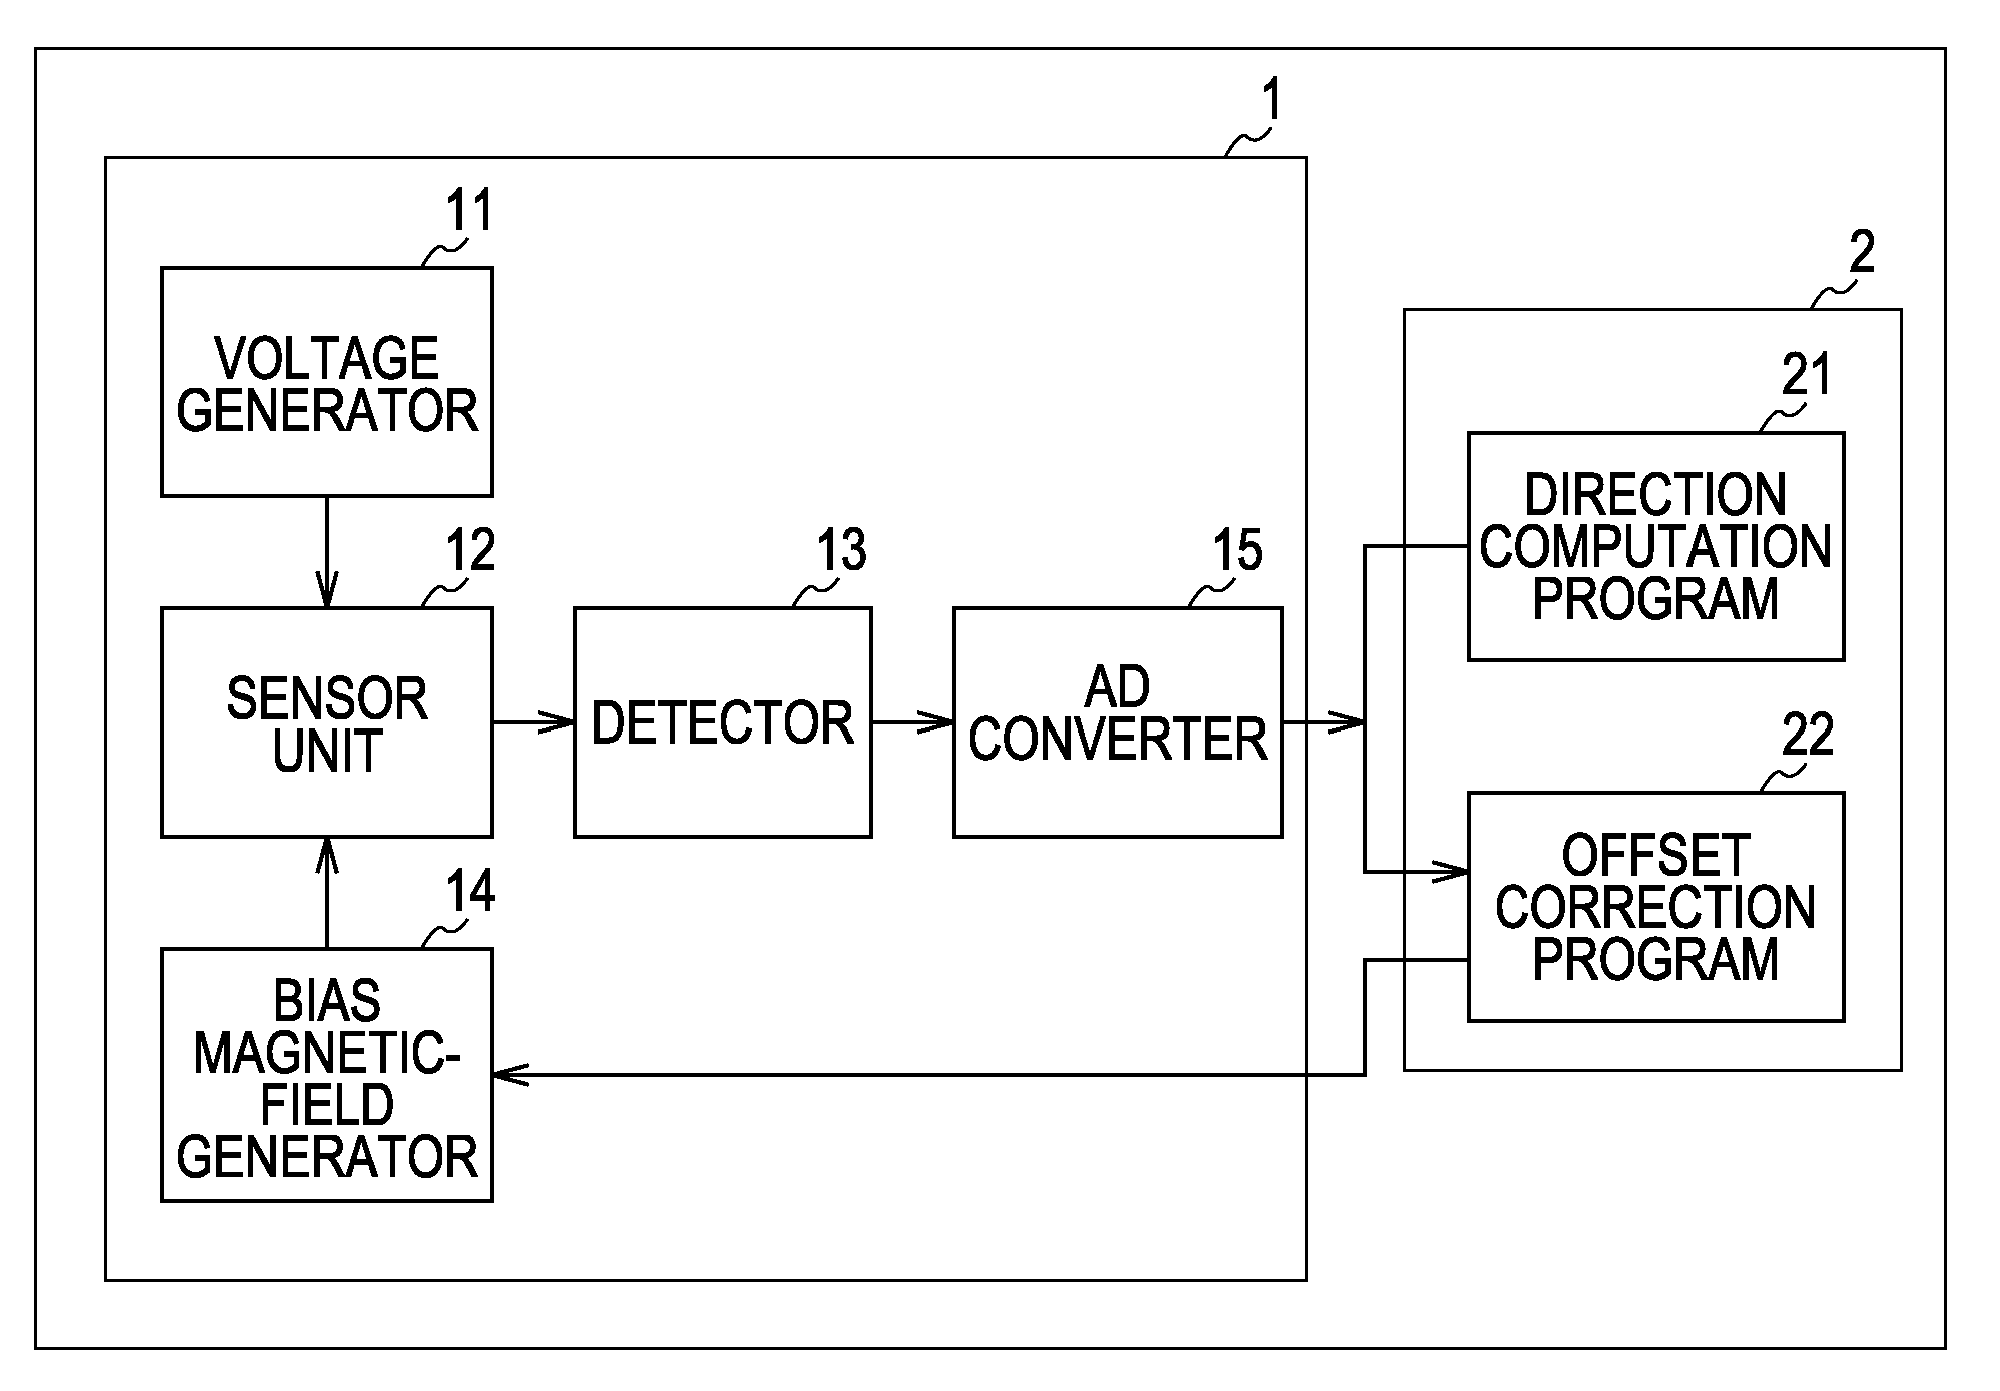 Offset correction program and electronic compass